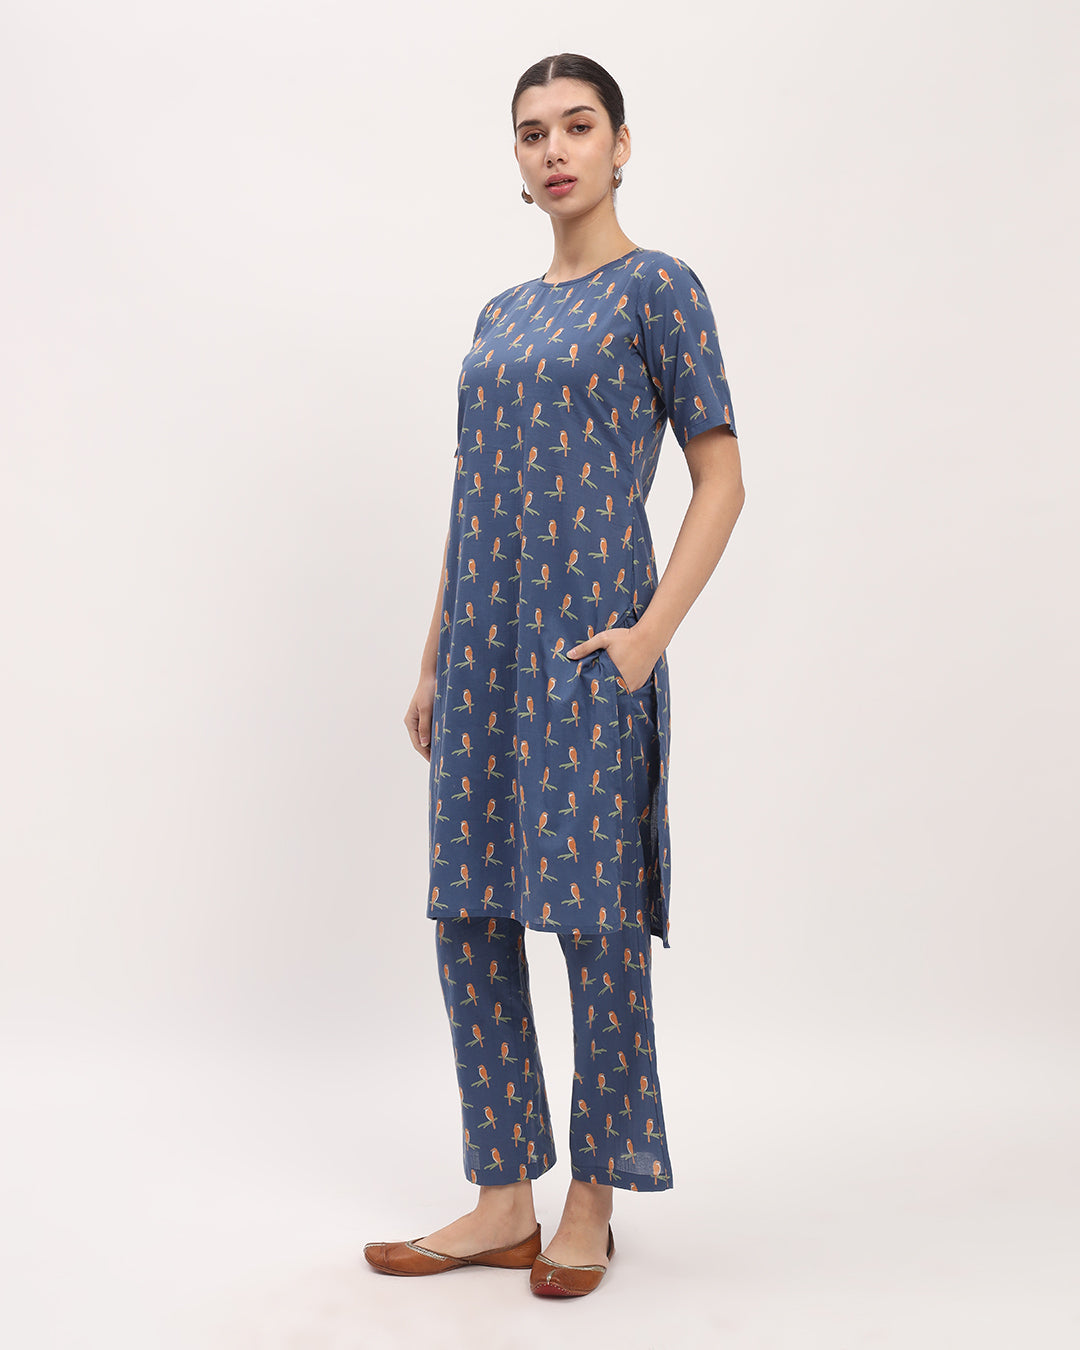 Parrot Island Round Neck Printed Co-ord Set